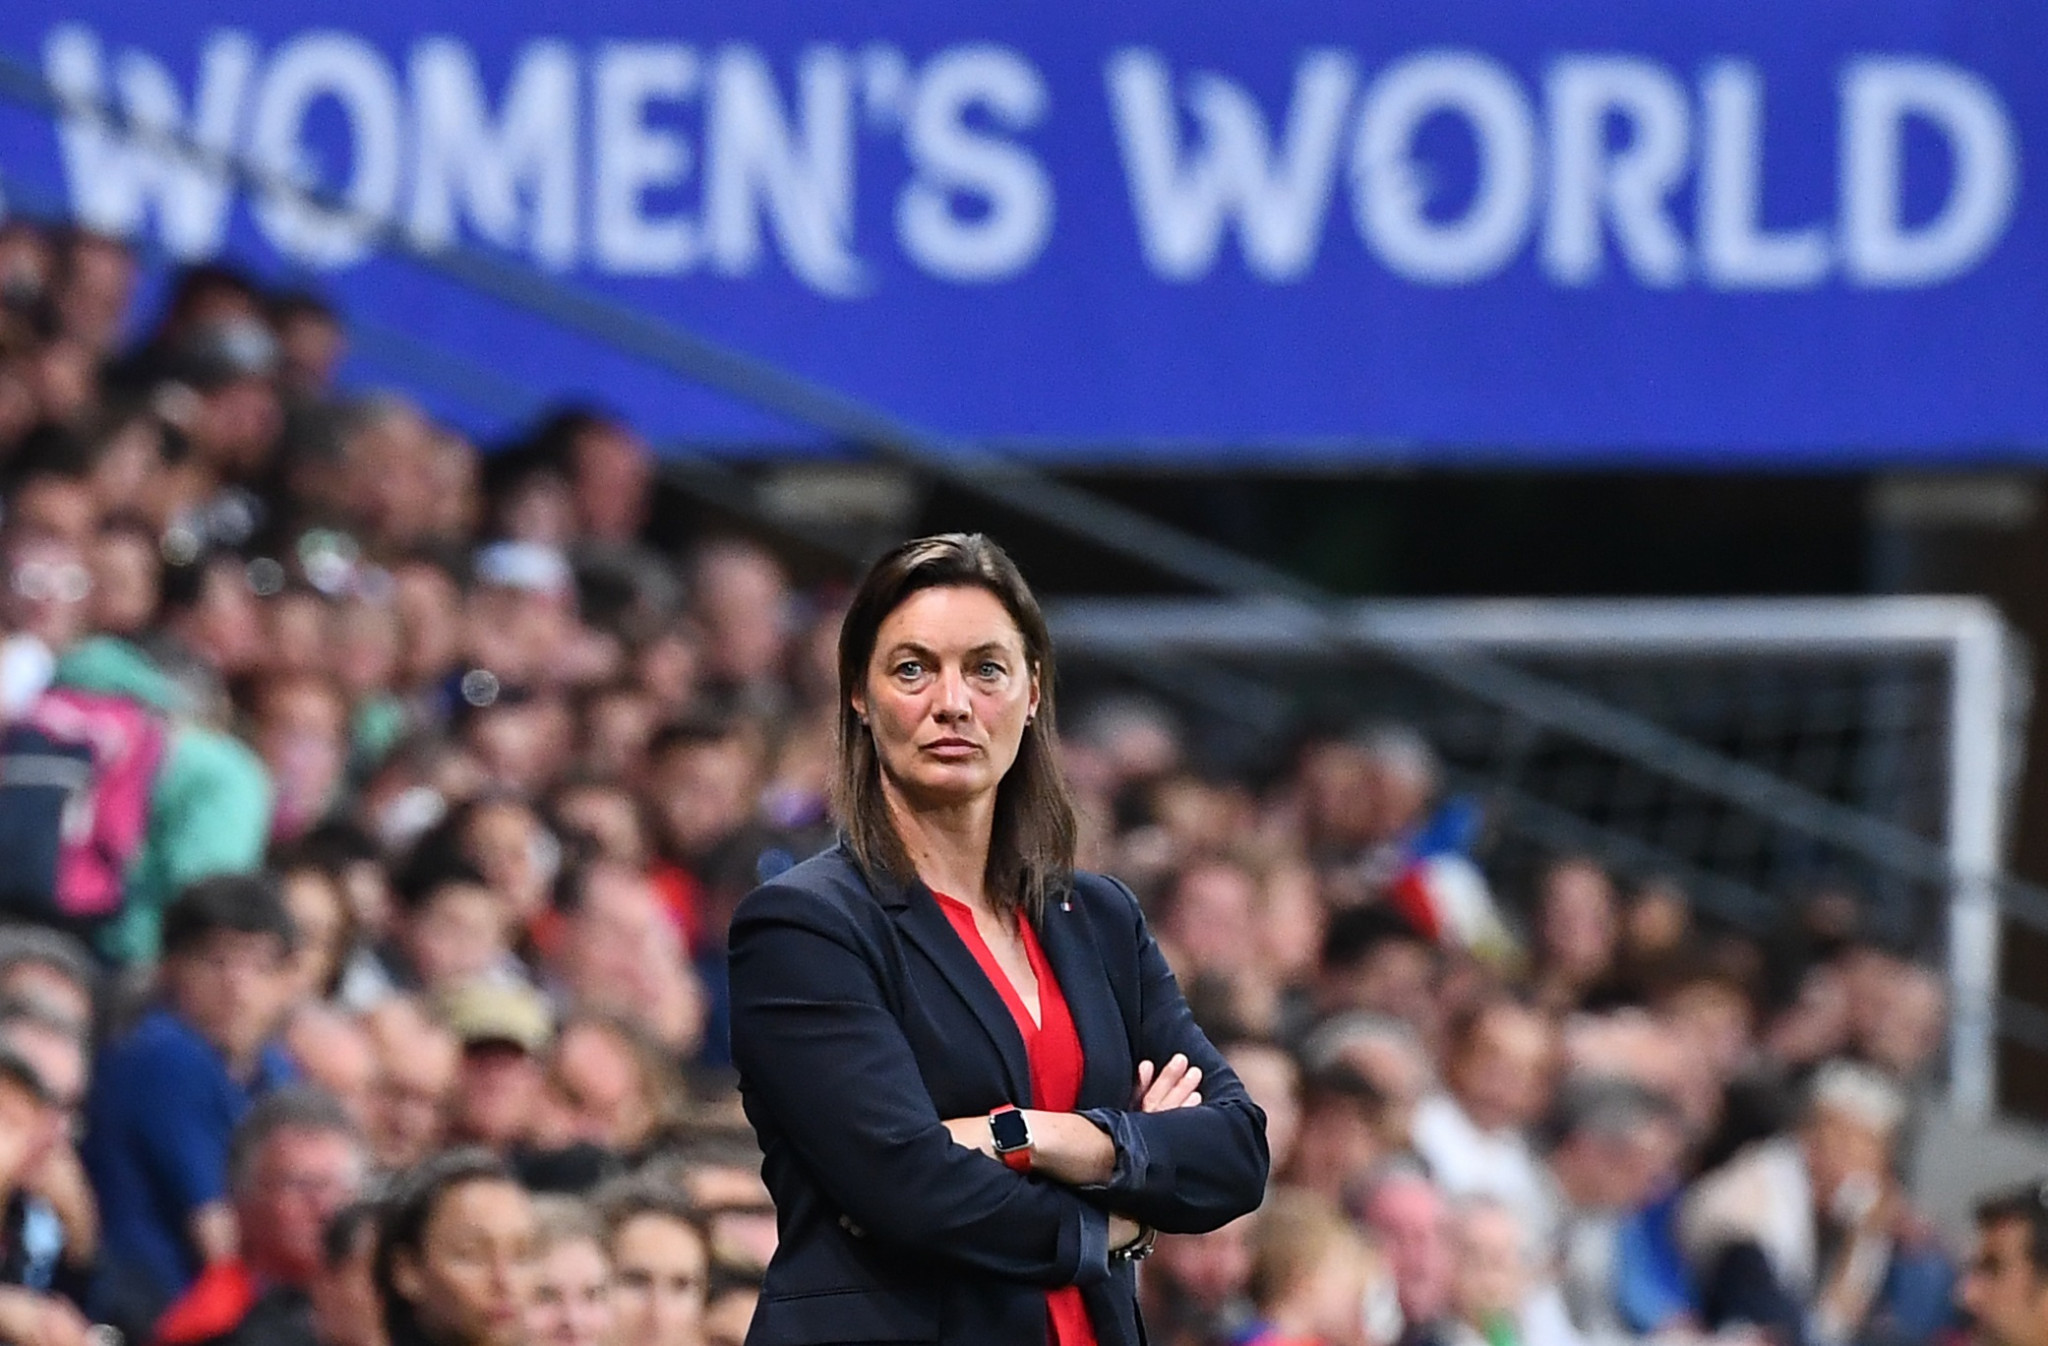 France women's head coach Corinne Deacon was on the receiving end of inappropriate comments from Le Graët, according to Aline Riera ©Getty Images